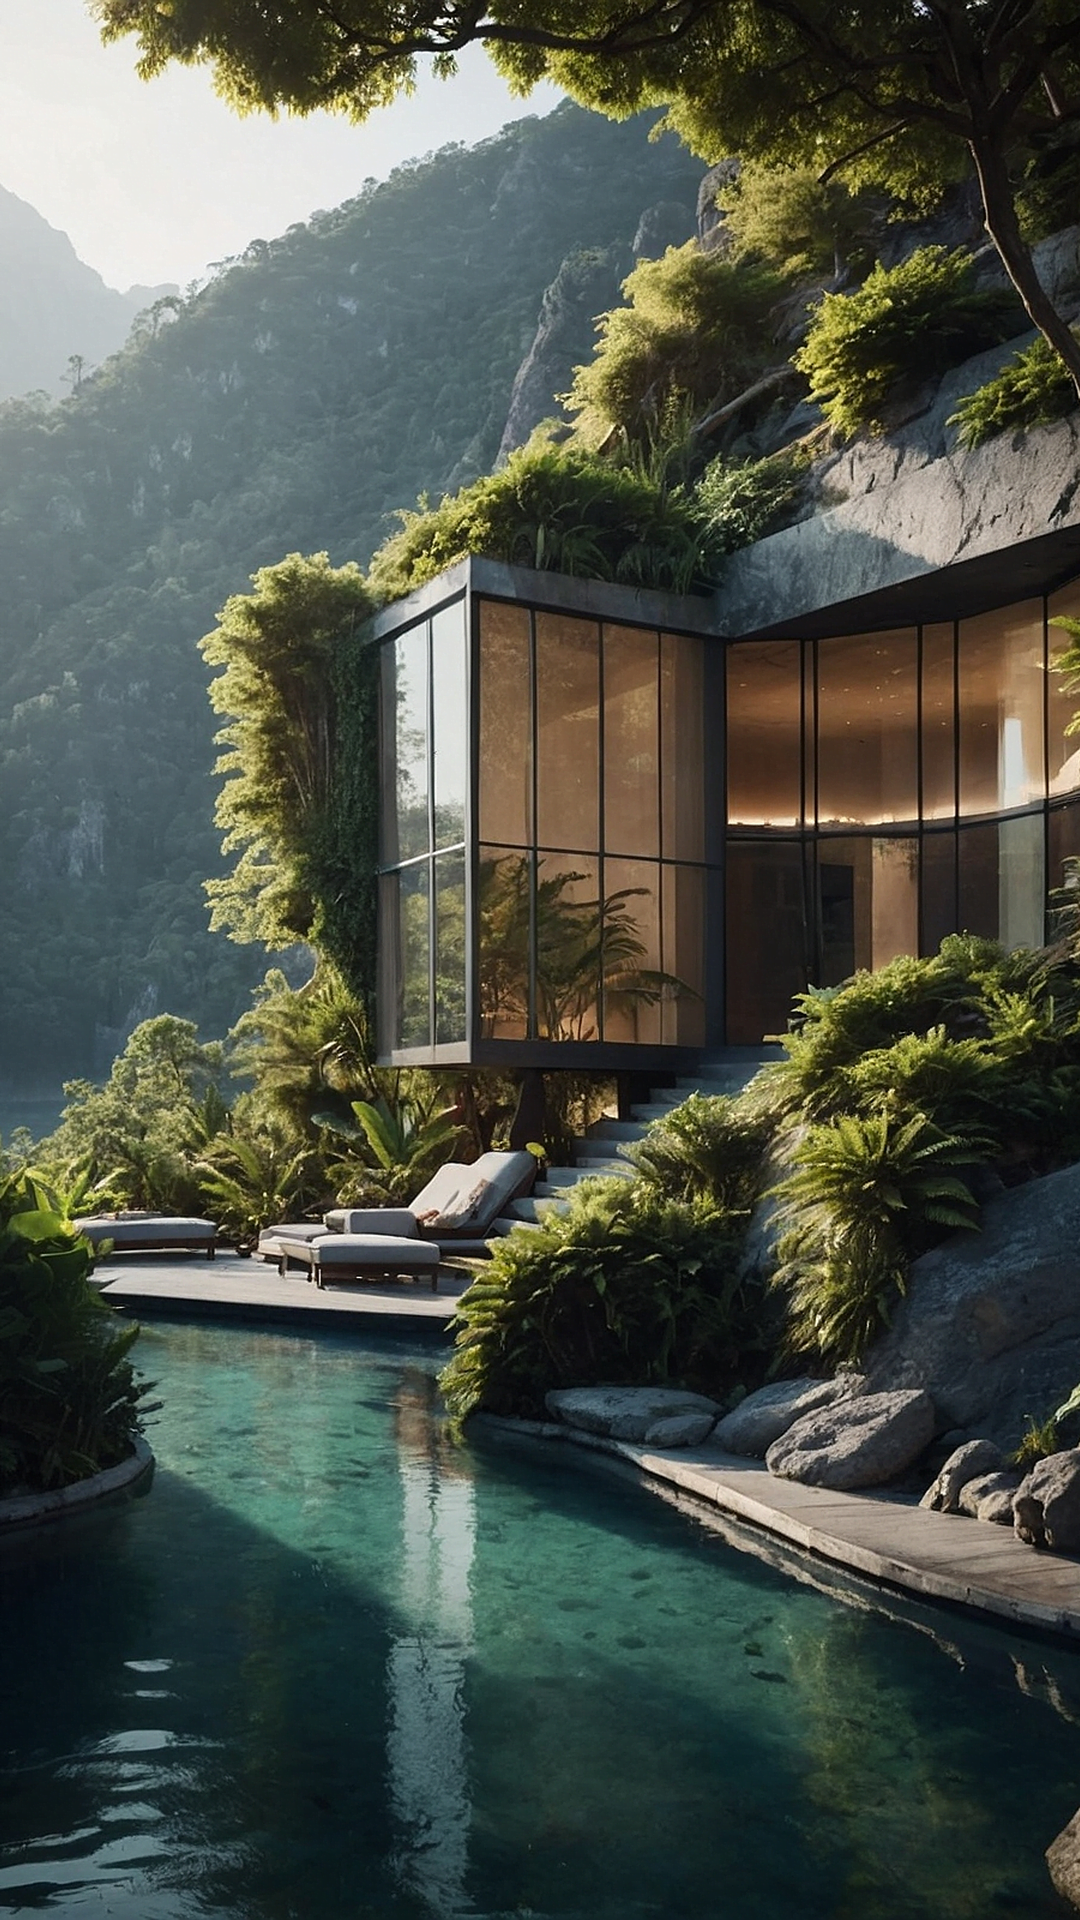 Mountain Modern: Contemporary Architecture Chiseled by Nature